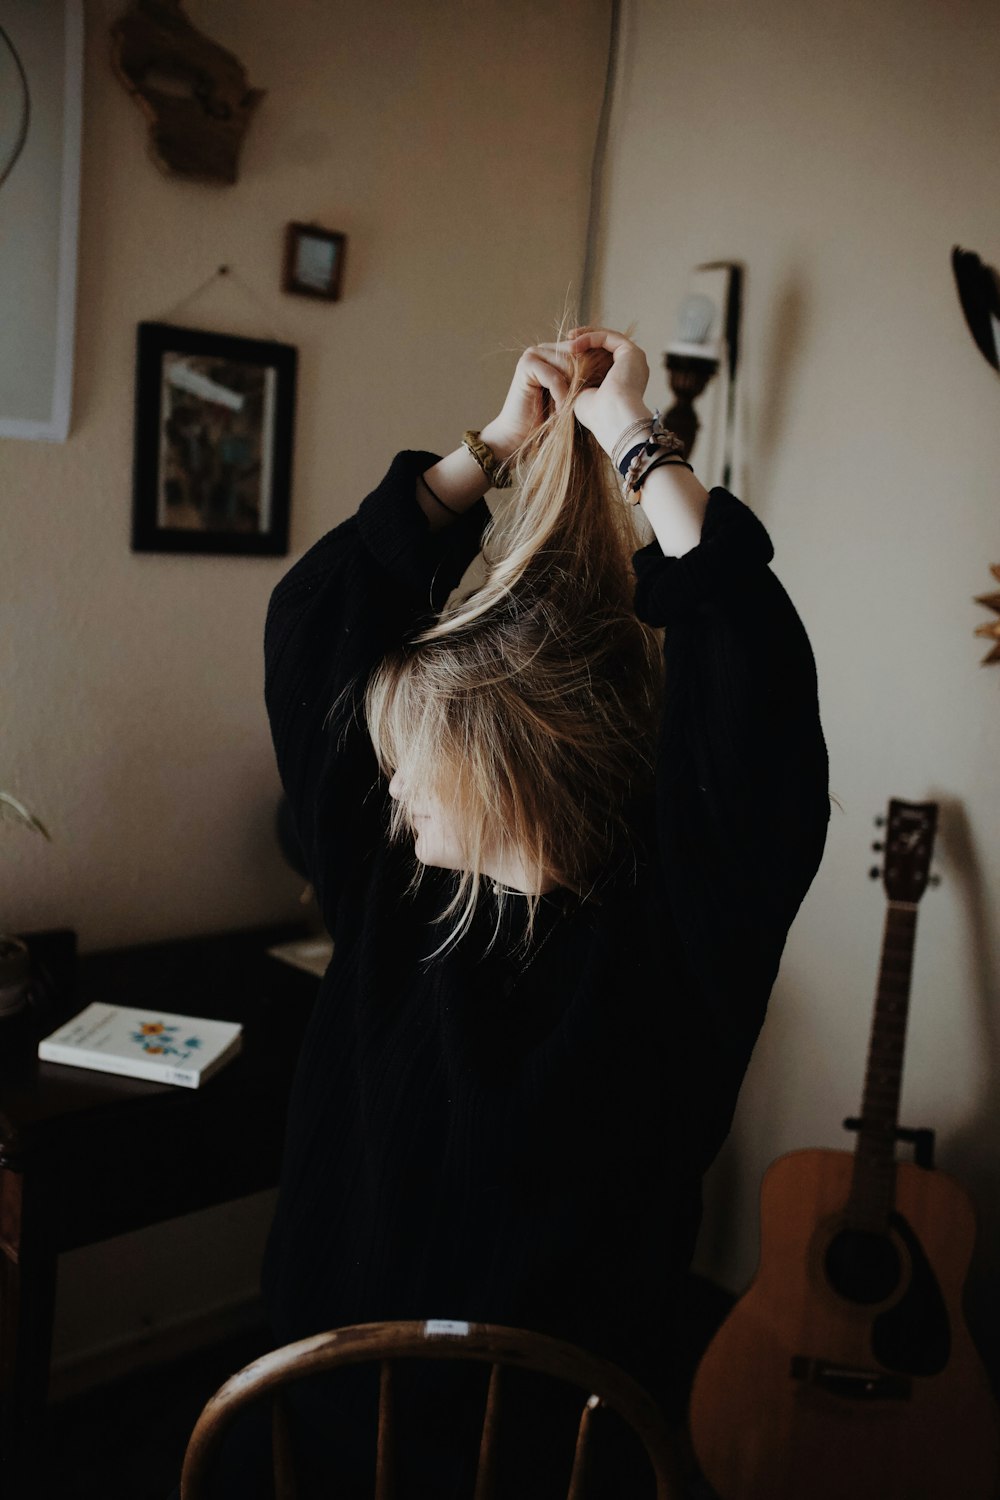 woman in black sweater holding her hair